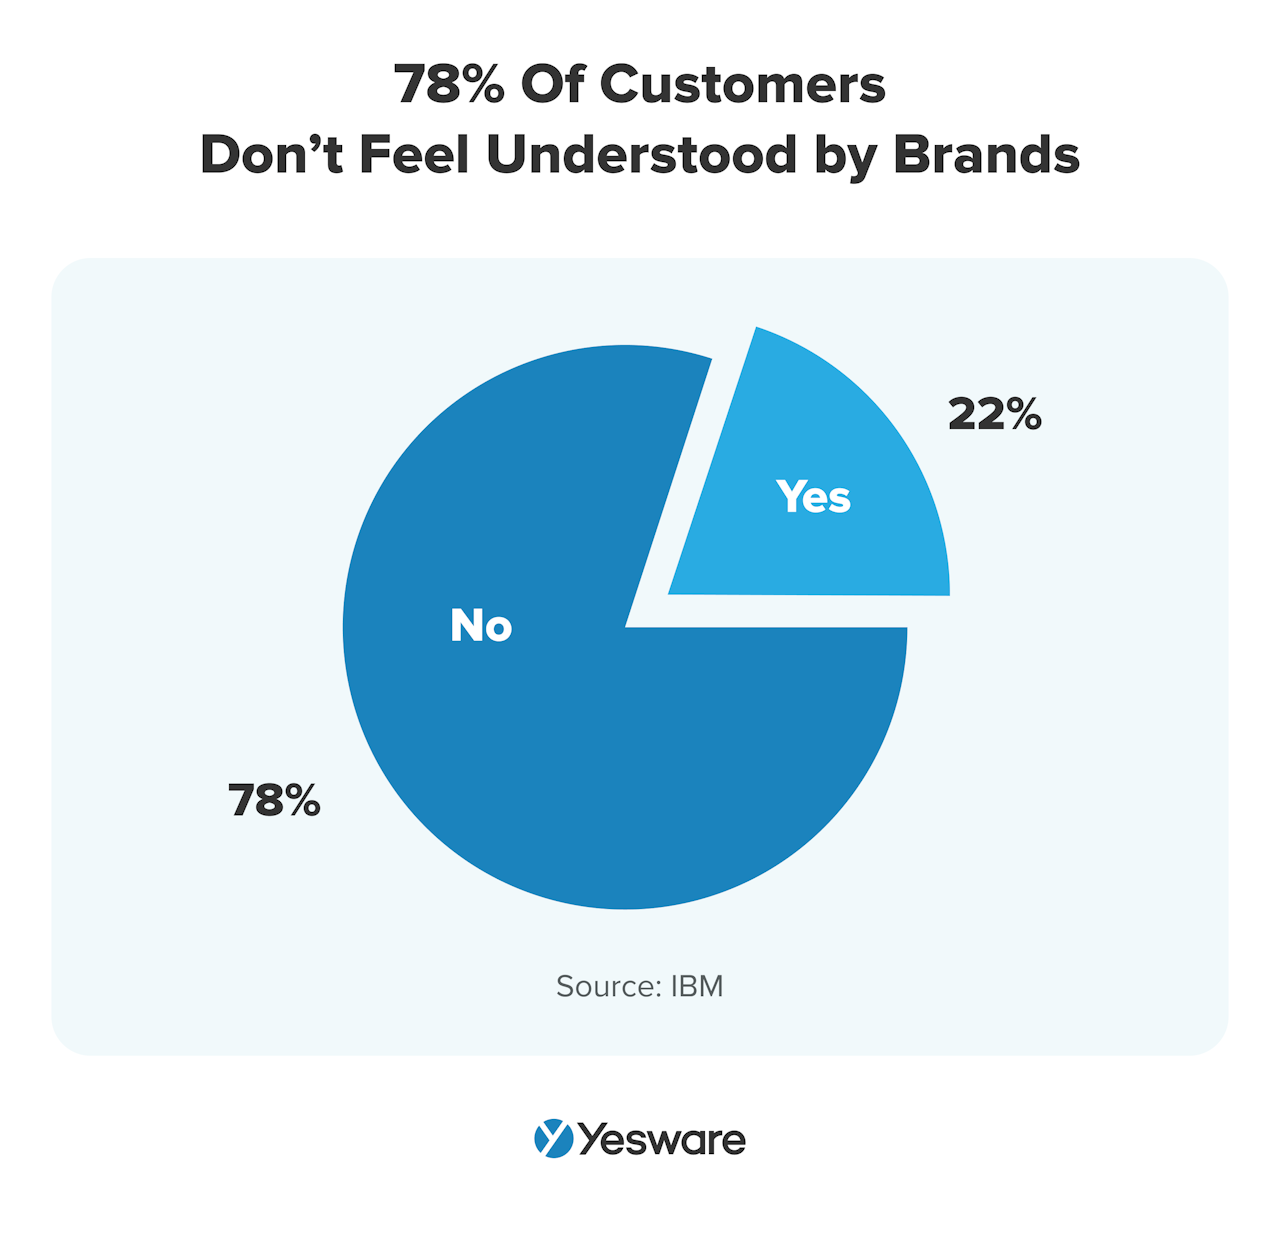 sales engagement: 78% of customers don't feel understood by brands